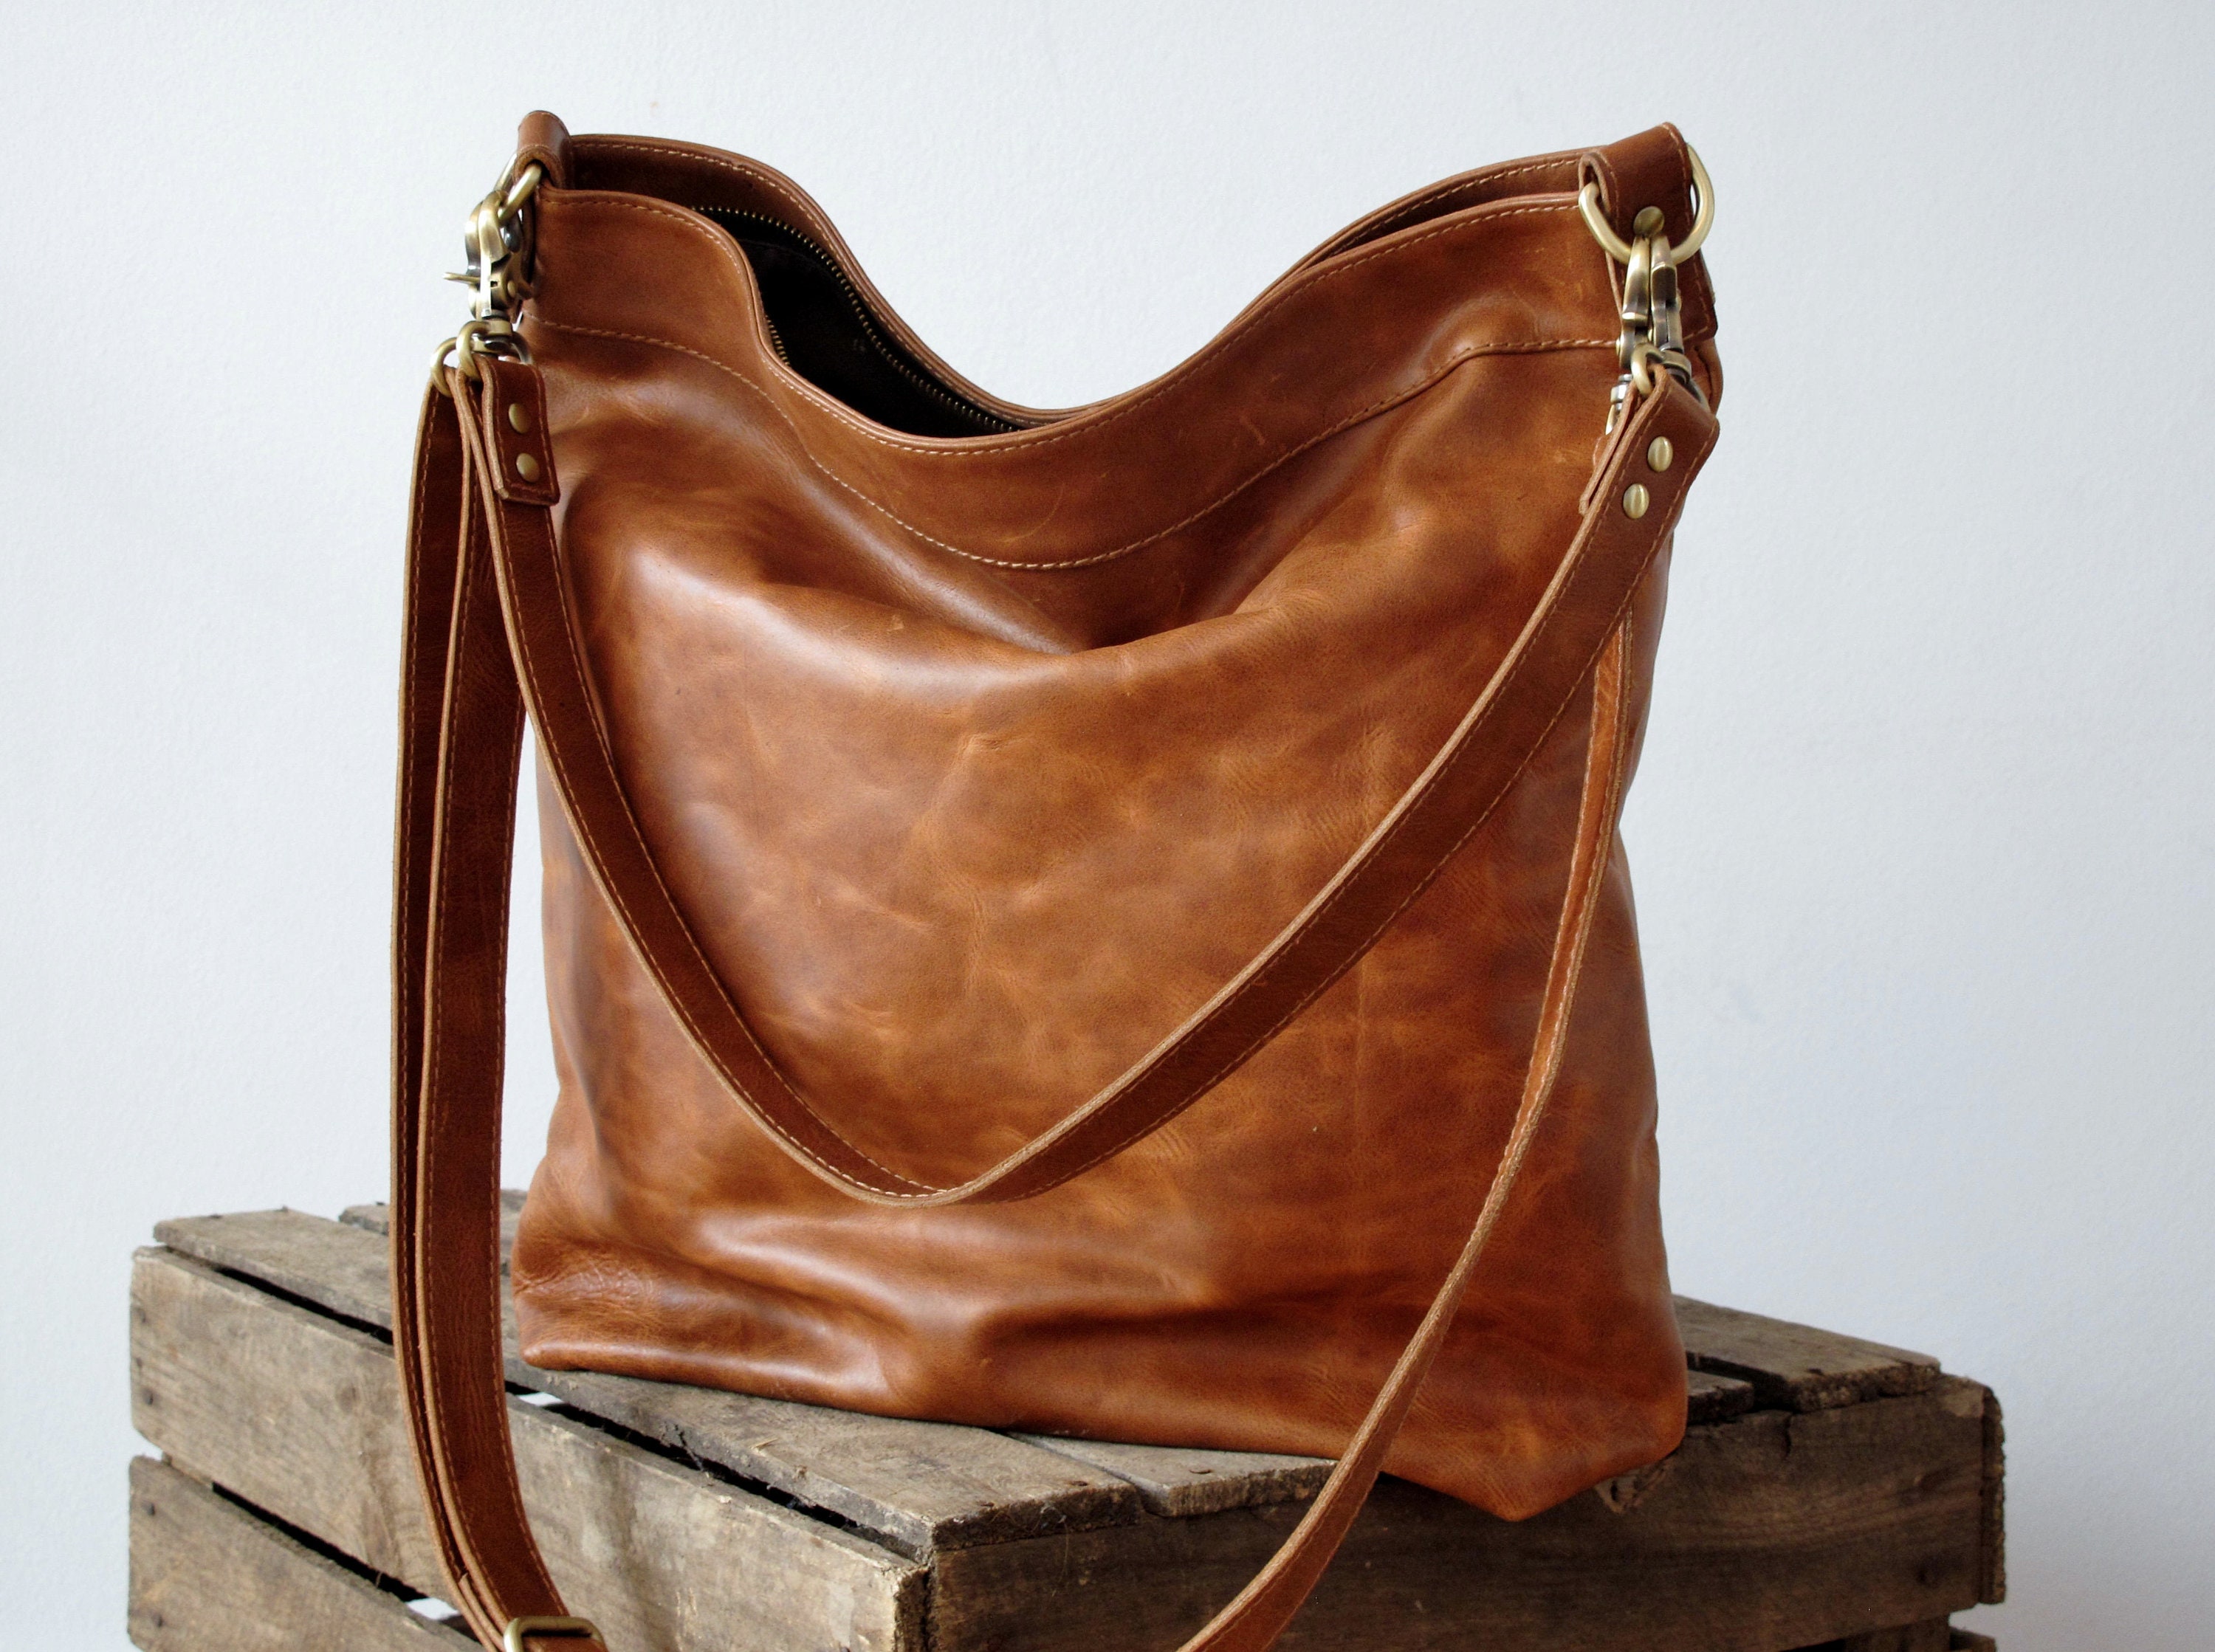 Tan Leather Hobo Bag Large Purse For Women Tote Bag With Etsy Uk